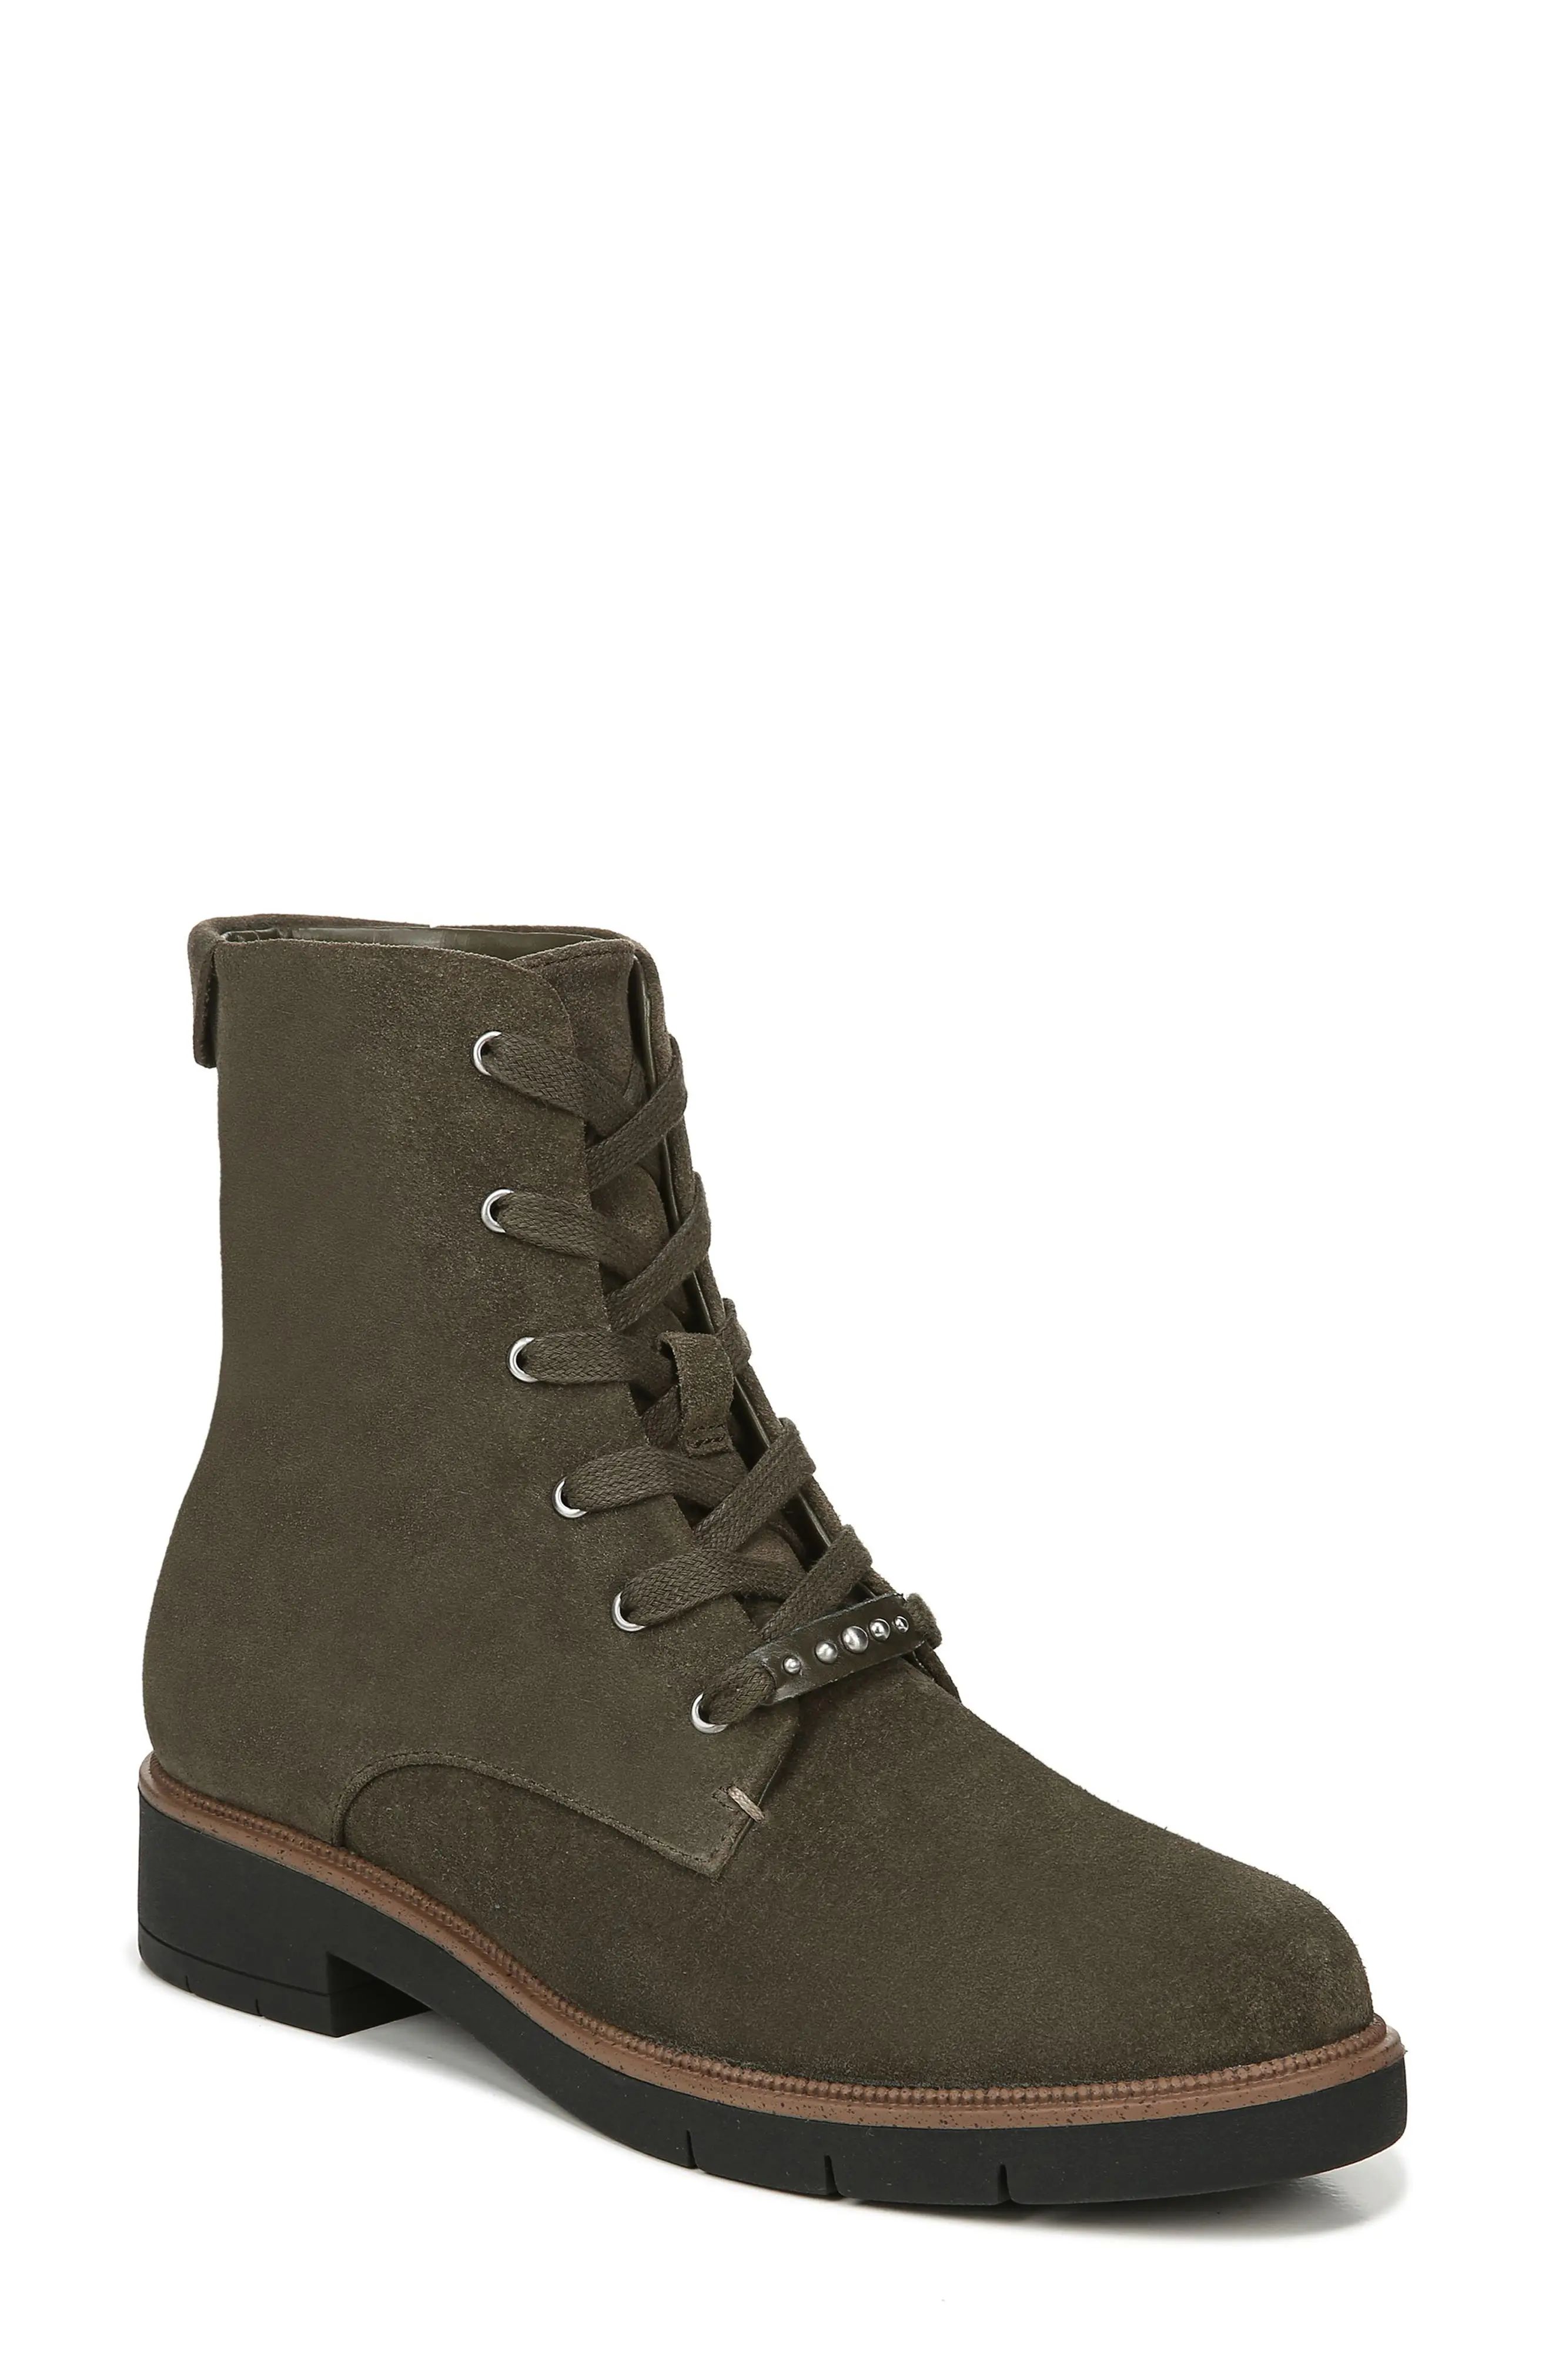 Dr. Scholl's Guild Combat Boot in Olive Leather at Nordstrom, Size 8.5 | Nordstrom